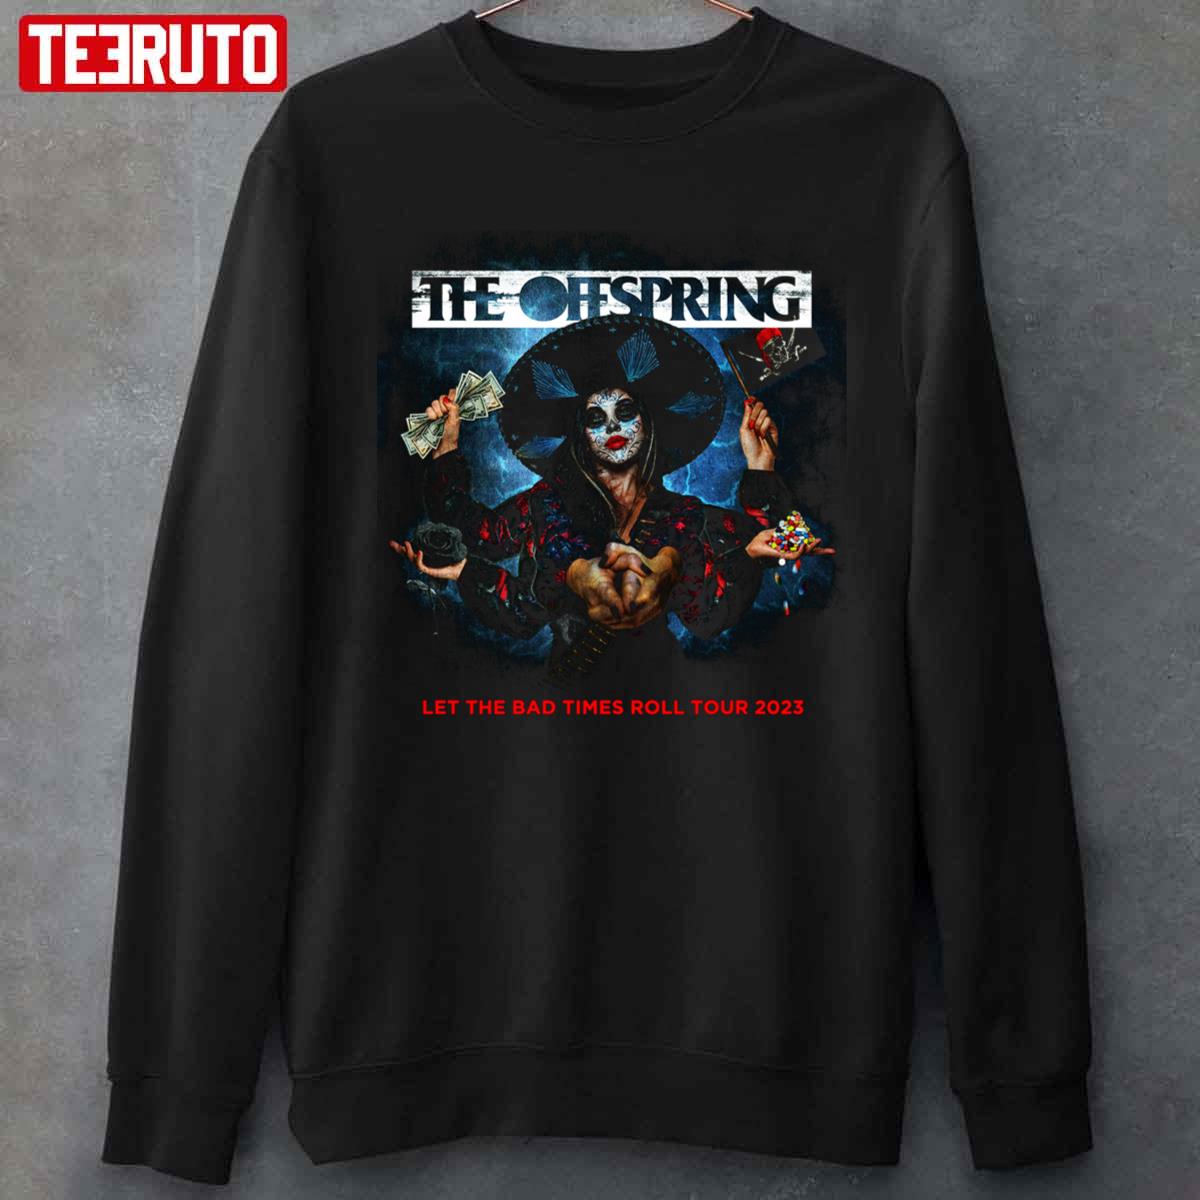 Let The Band Times Roll Tour The Offspring Vintage Unisex T-Shirt